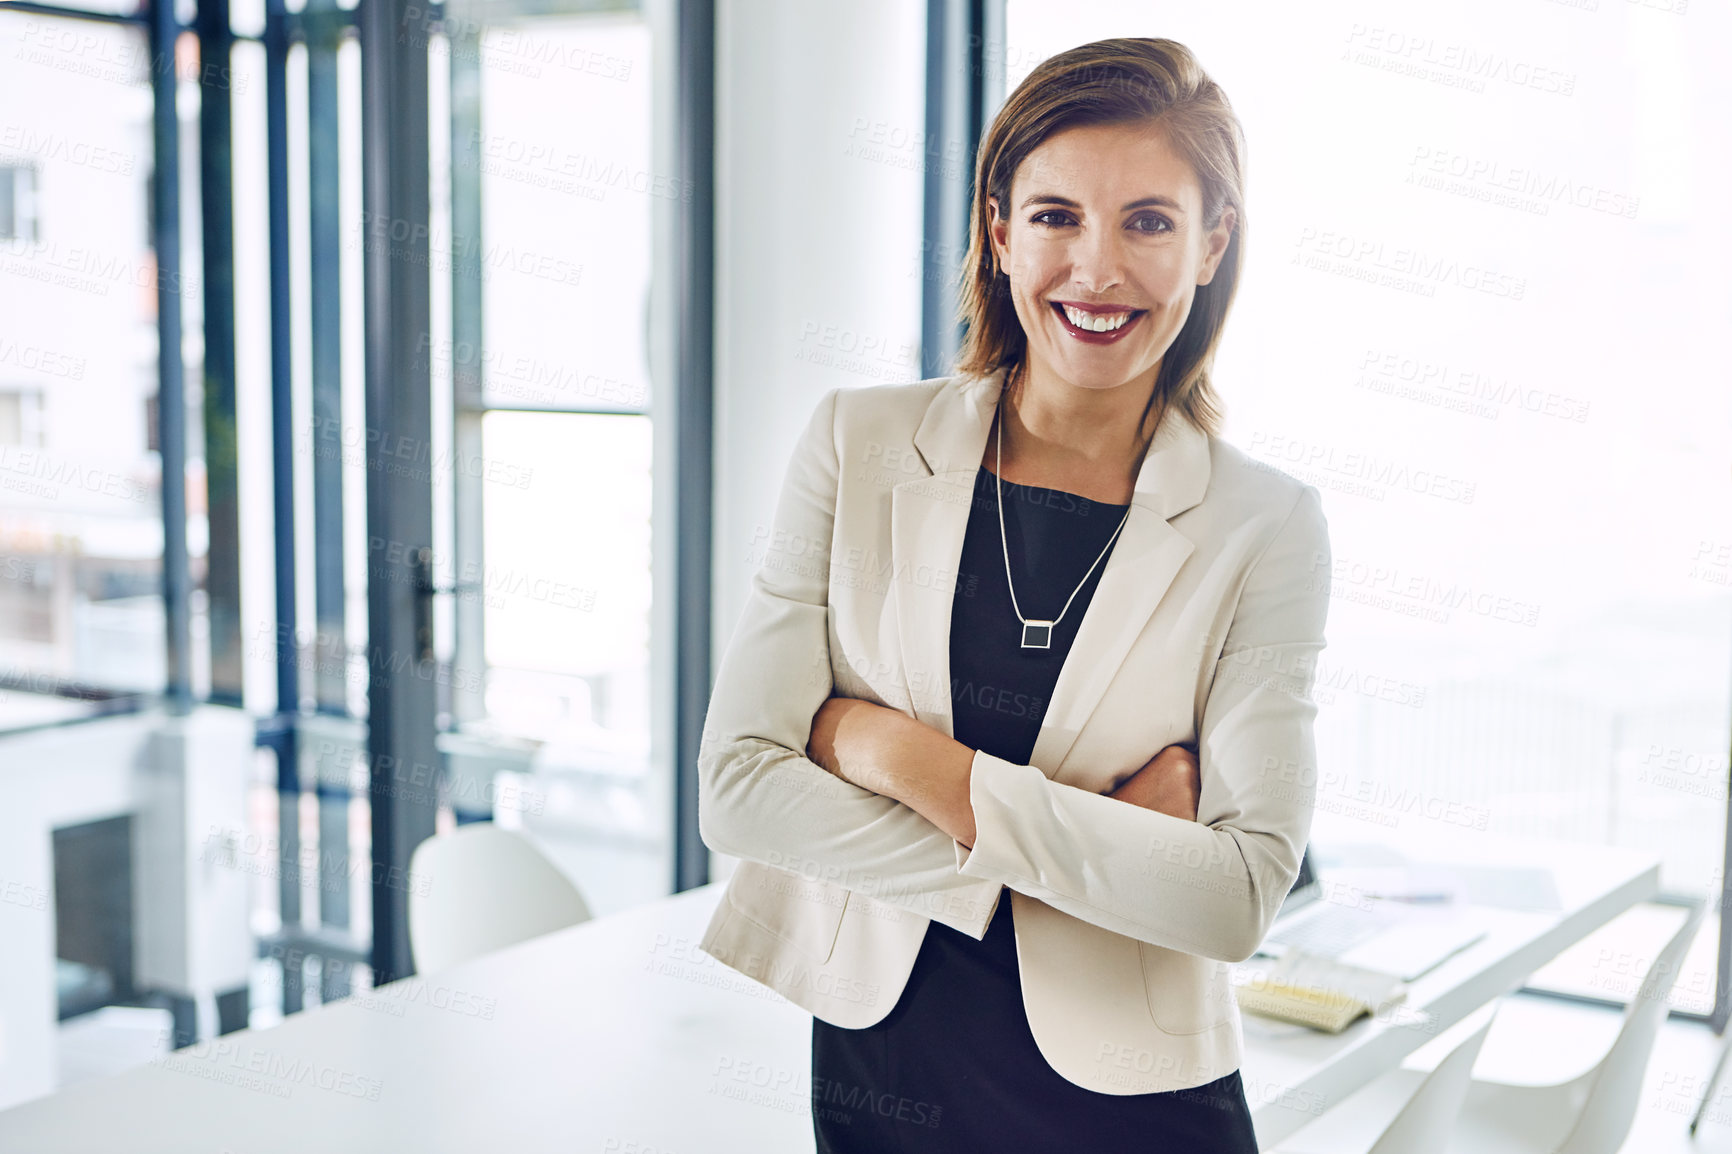 Buy stock photo Portrait of a corporate businesswoman in an office